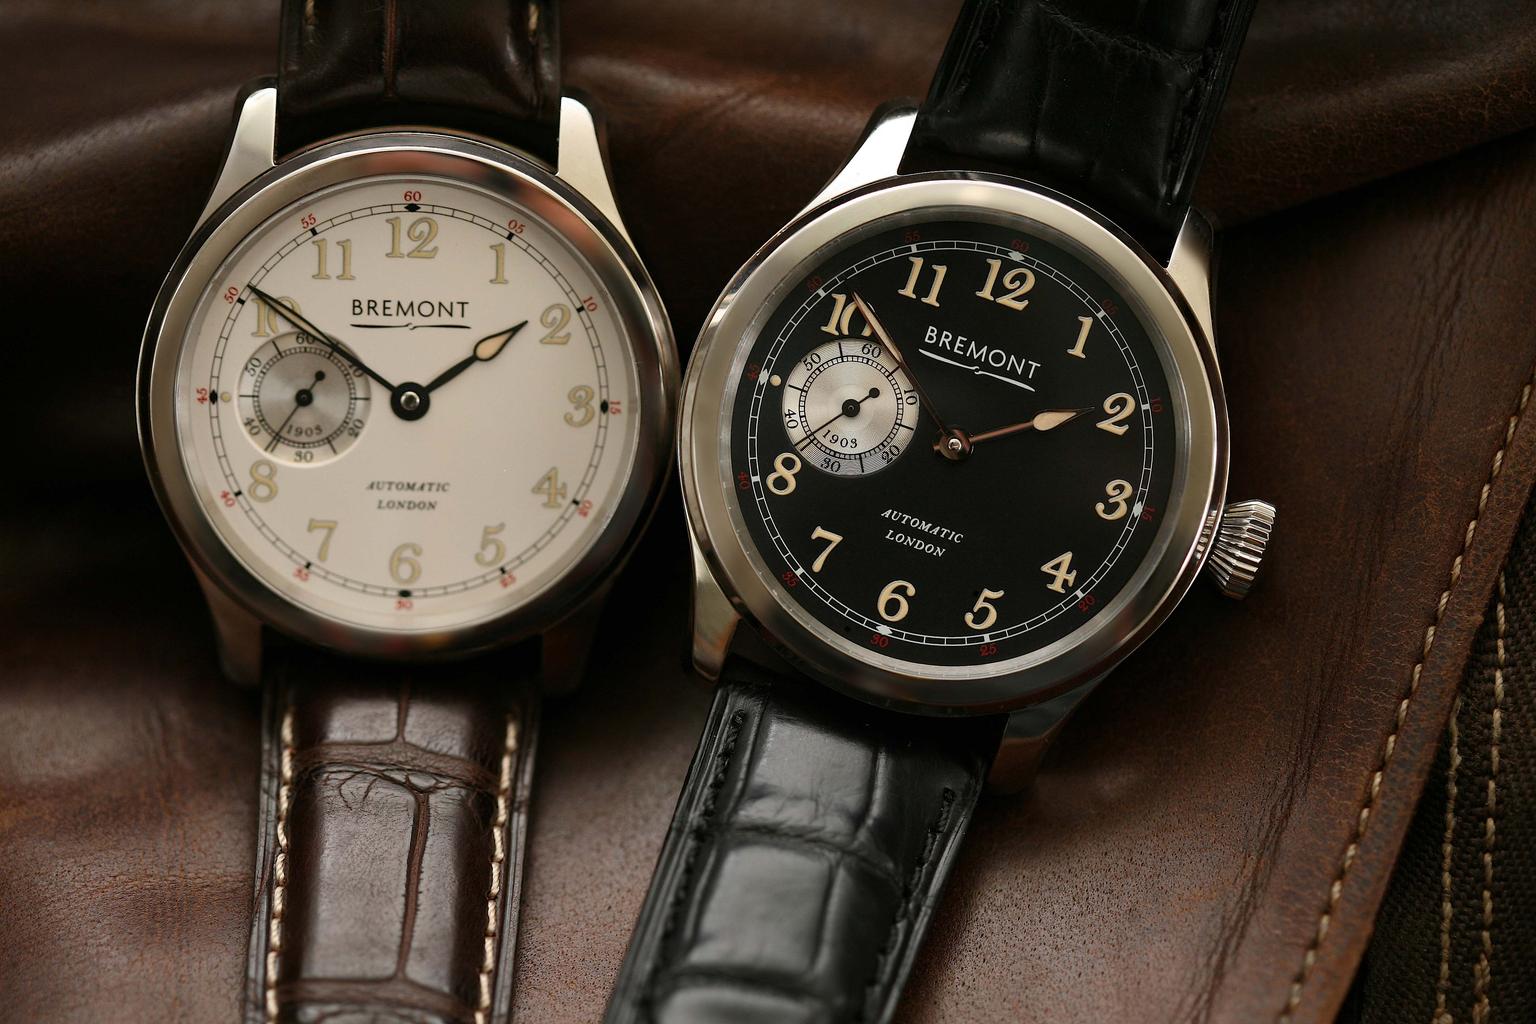 Bremont's new The Wright Flyer watch not only houses the brand's first British-made in-house movement. Embedded in each watch is a small piece of the muslin material used to wrap The Wright Flyer, the first plane ever to become airborne, flown by the Wrig